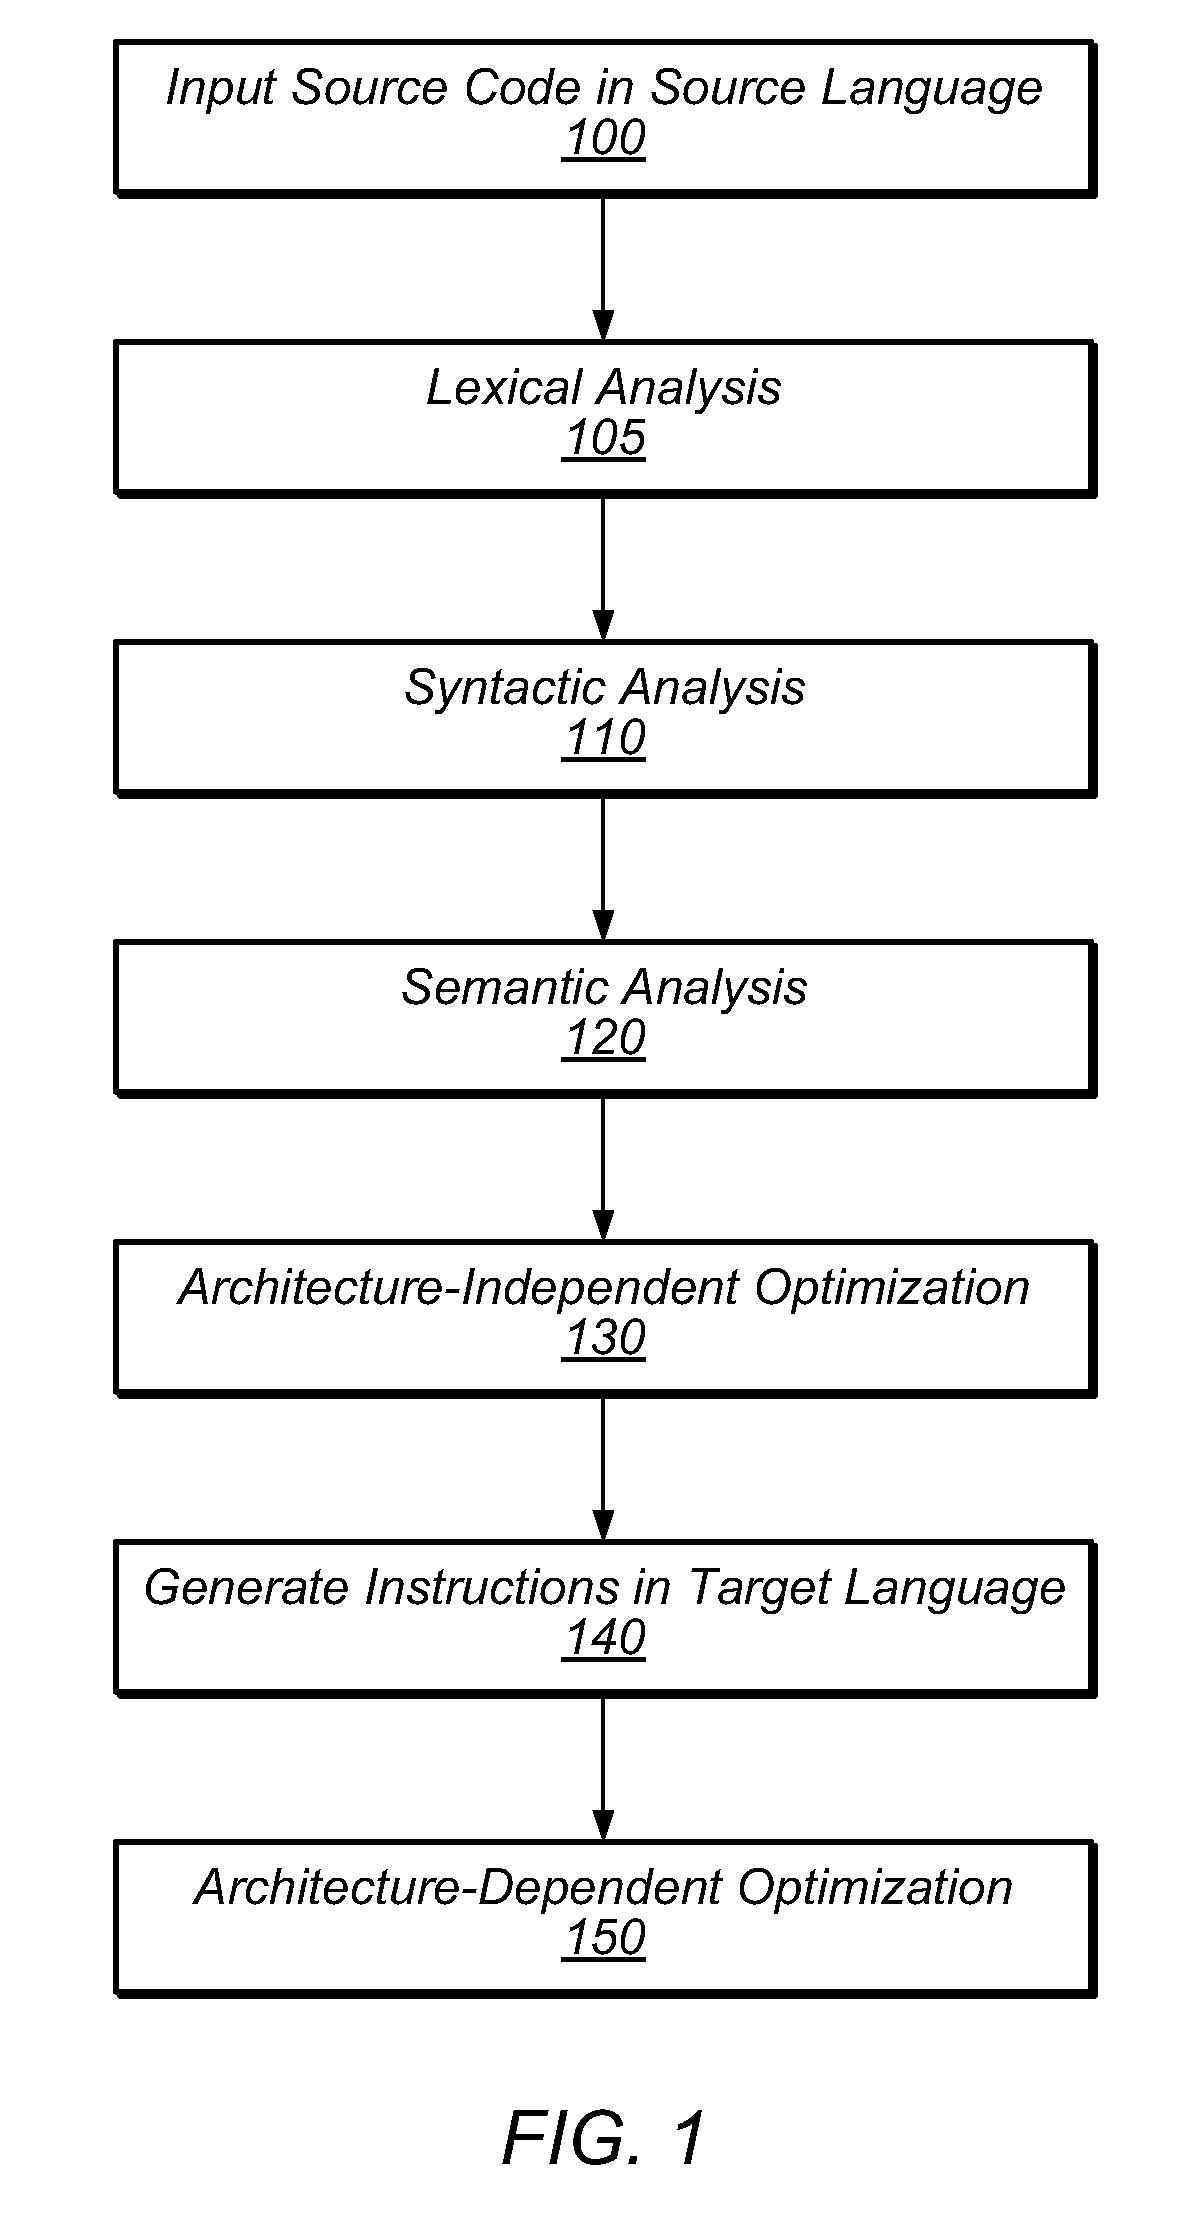 System and Method for Reducing Transactional Abort Rates Using Compiler Optimization Techniques